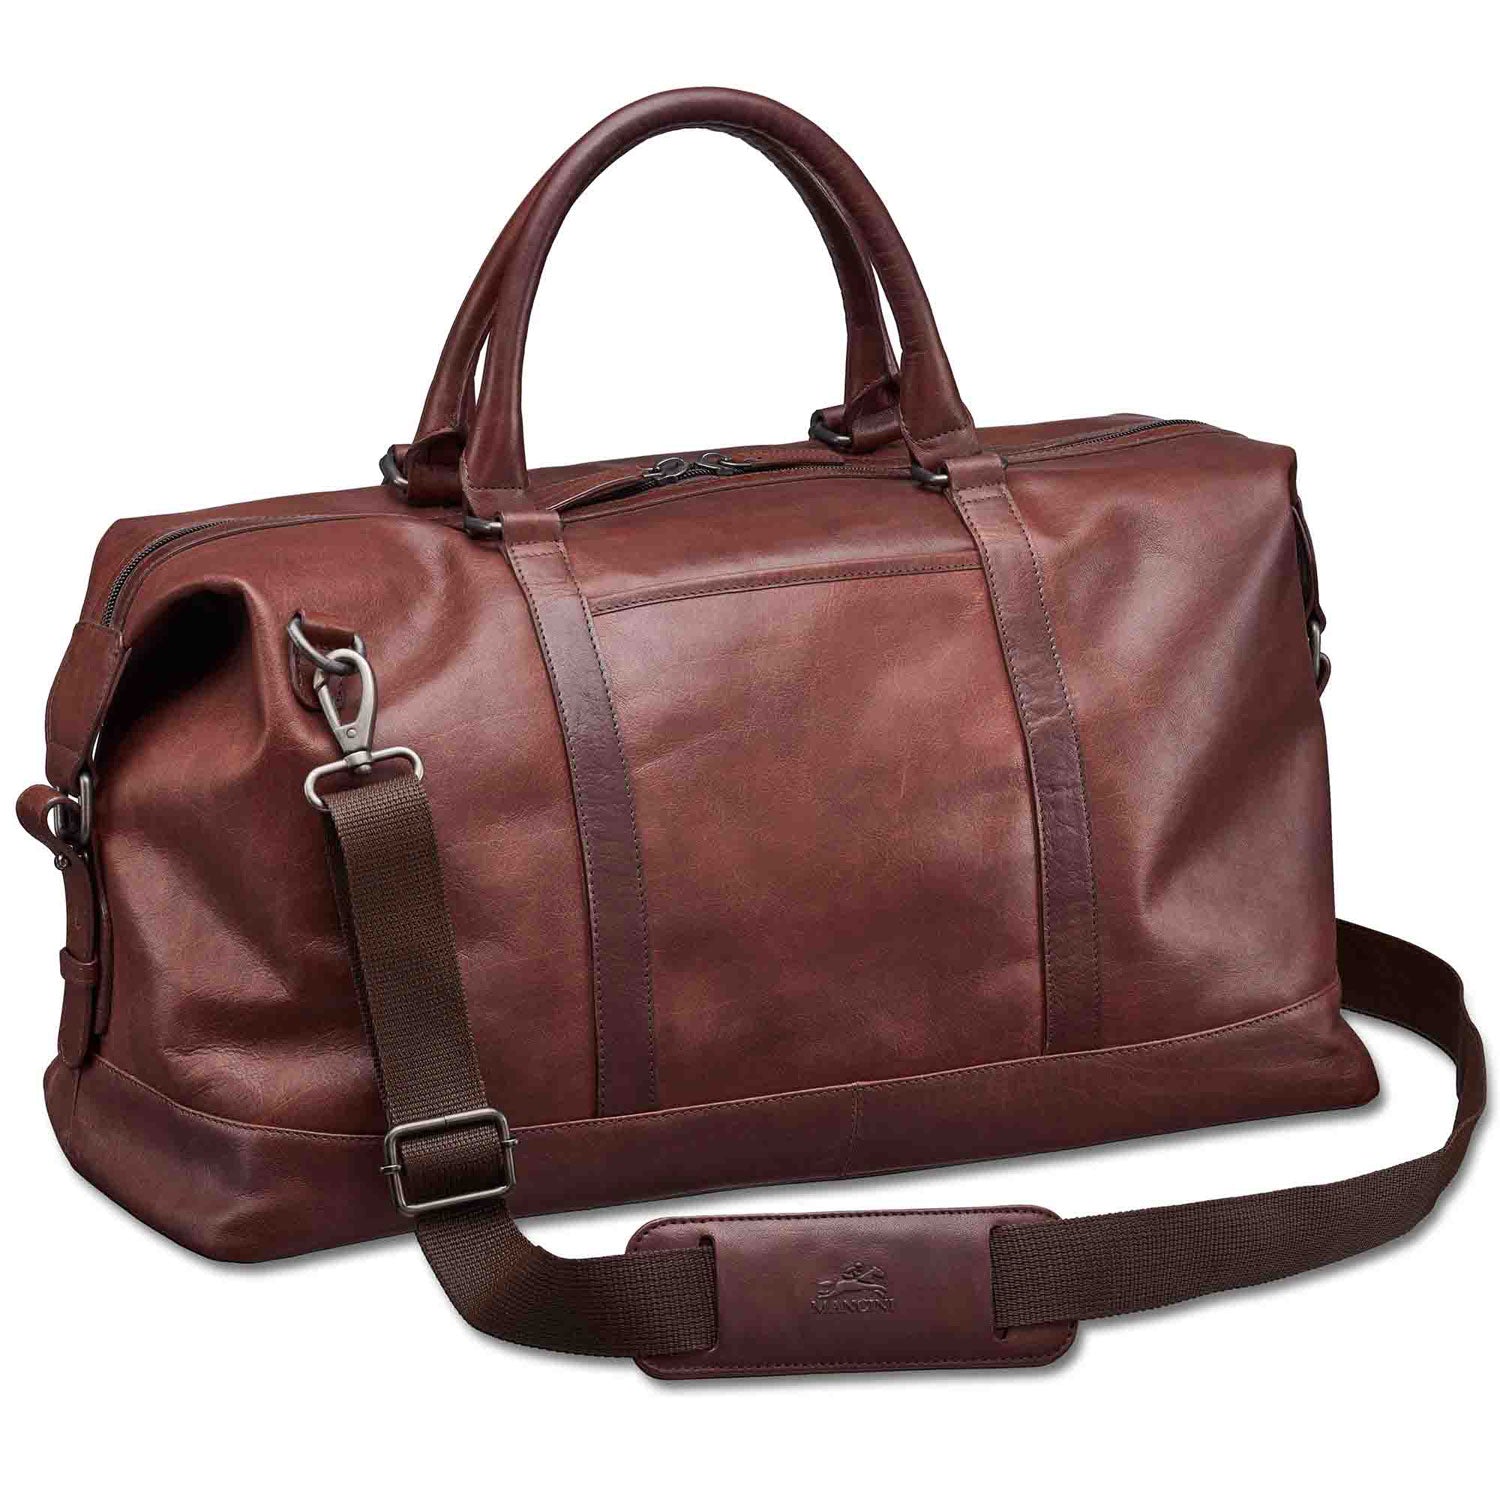 Mancini Leather Carry-on Duffle Bag, 20" x 10" x 12", Brown